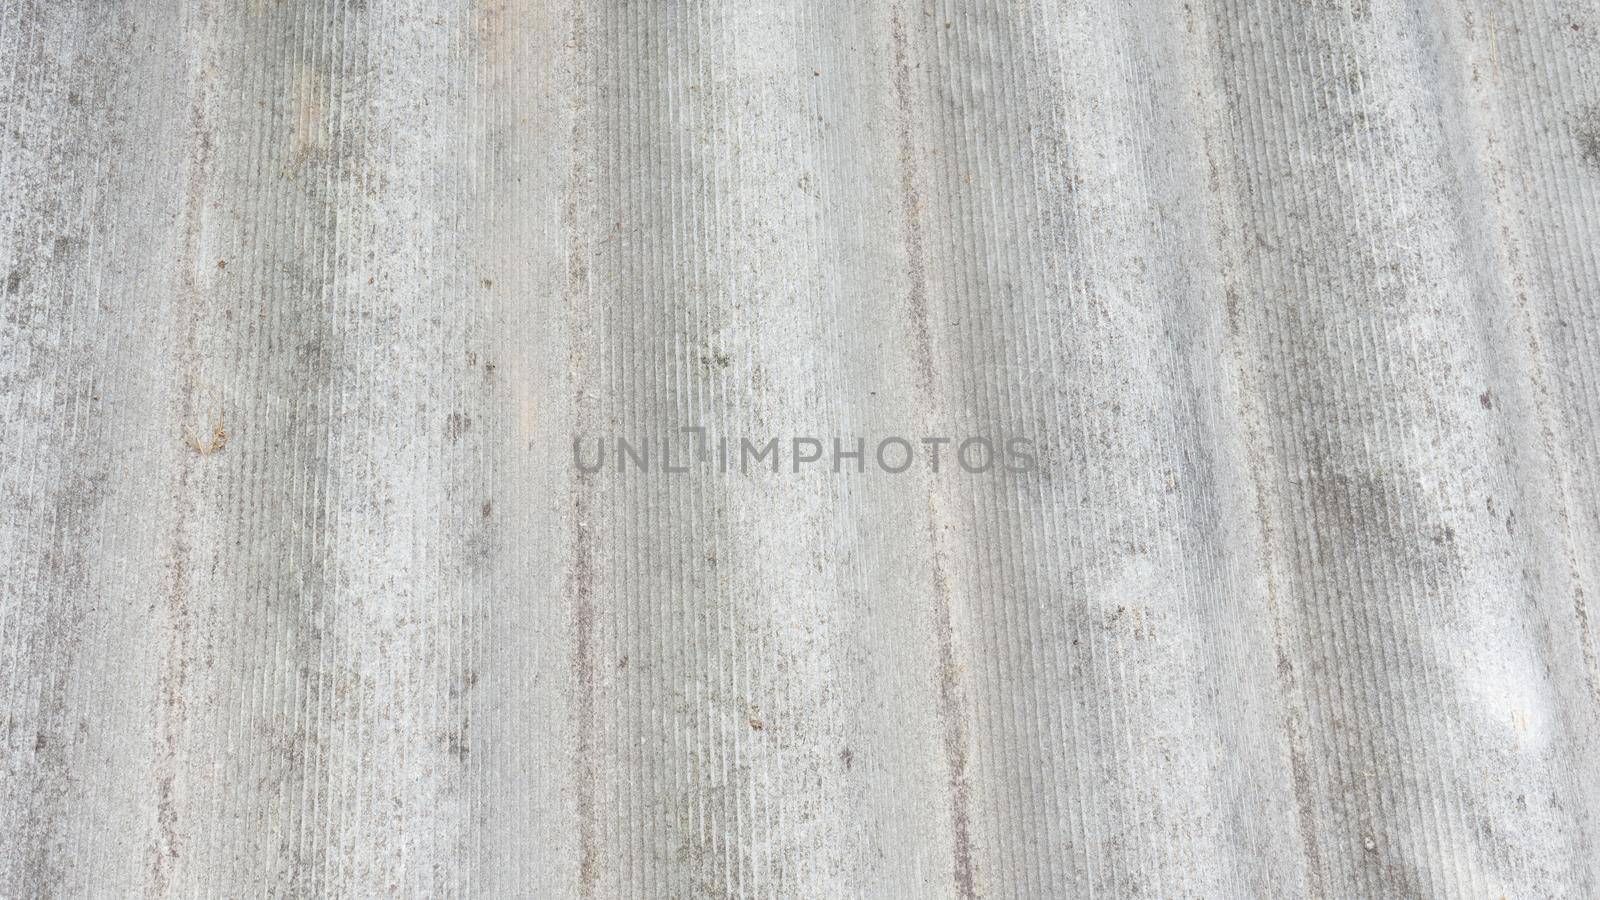 Slate texture. Gray background close up with slate roof covering.